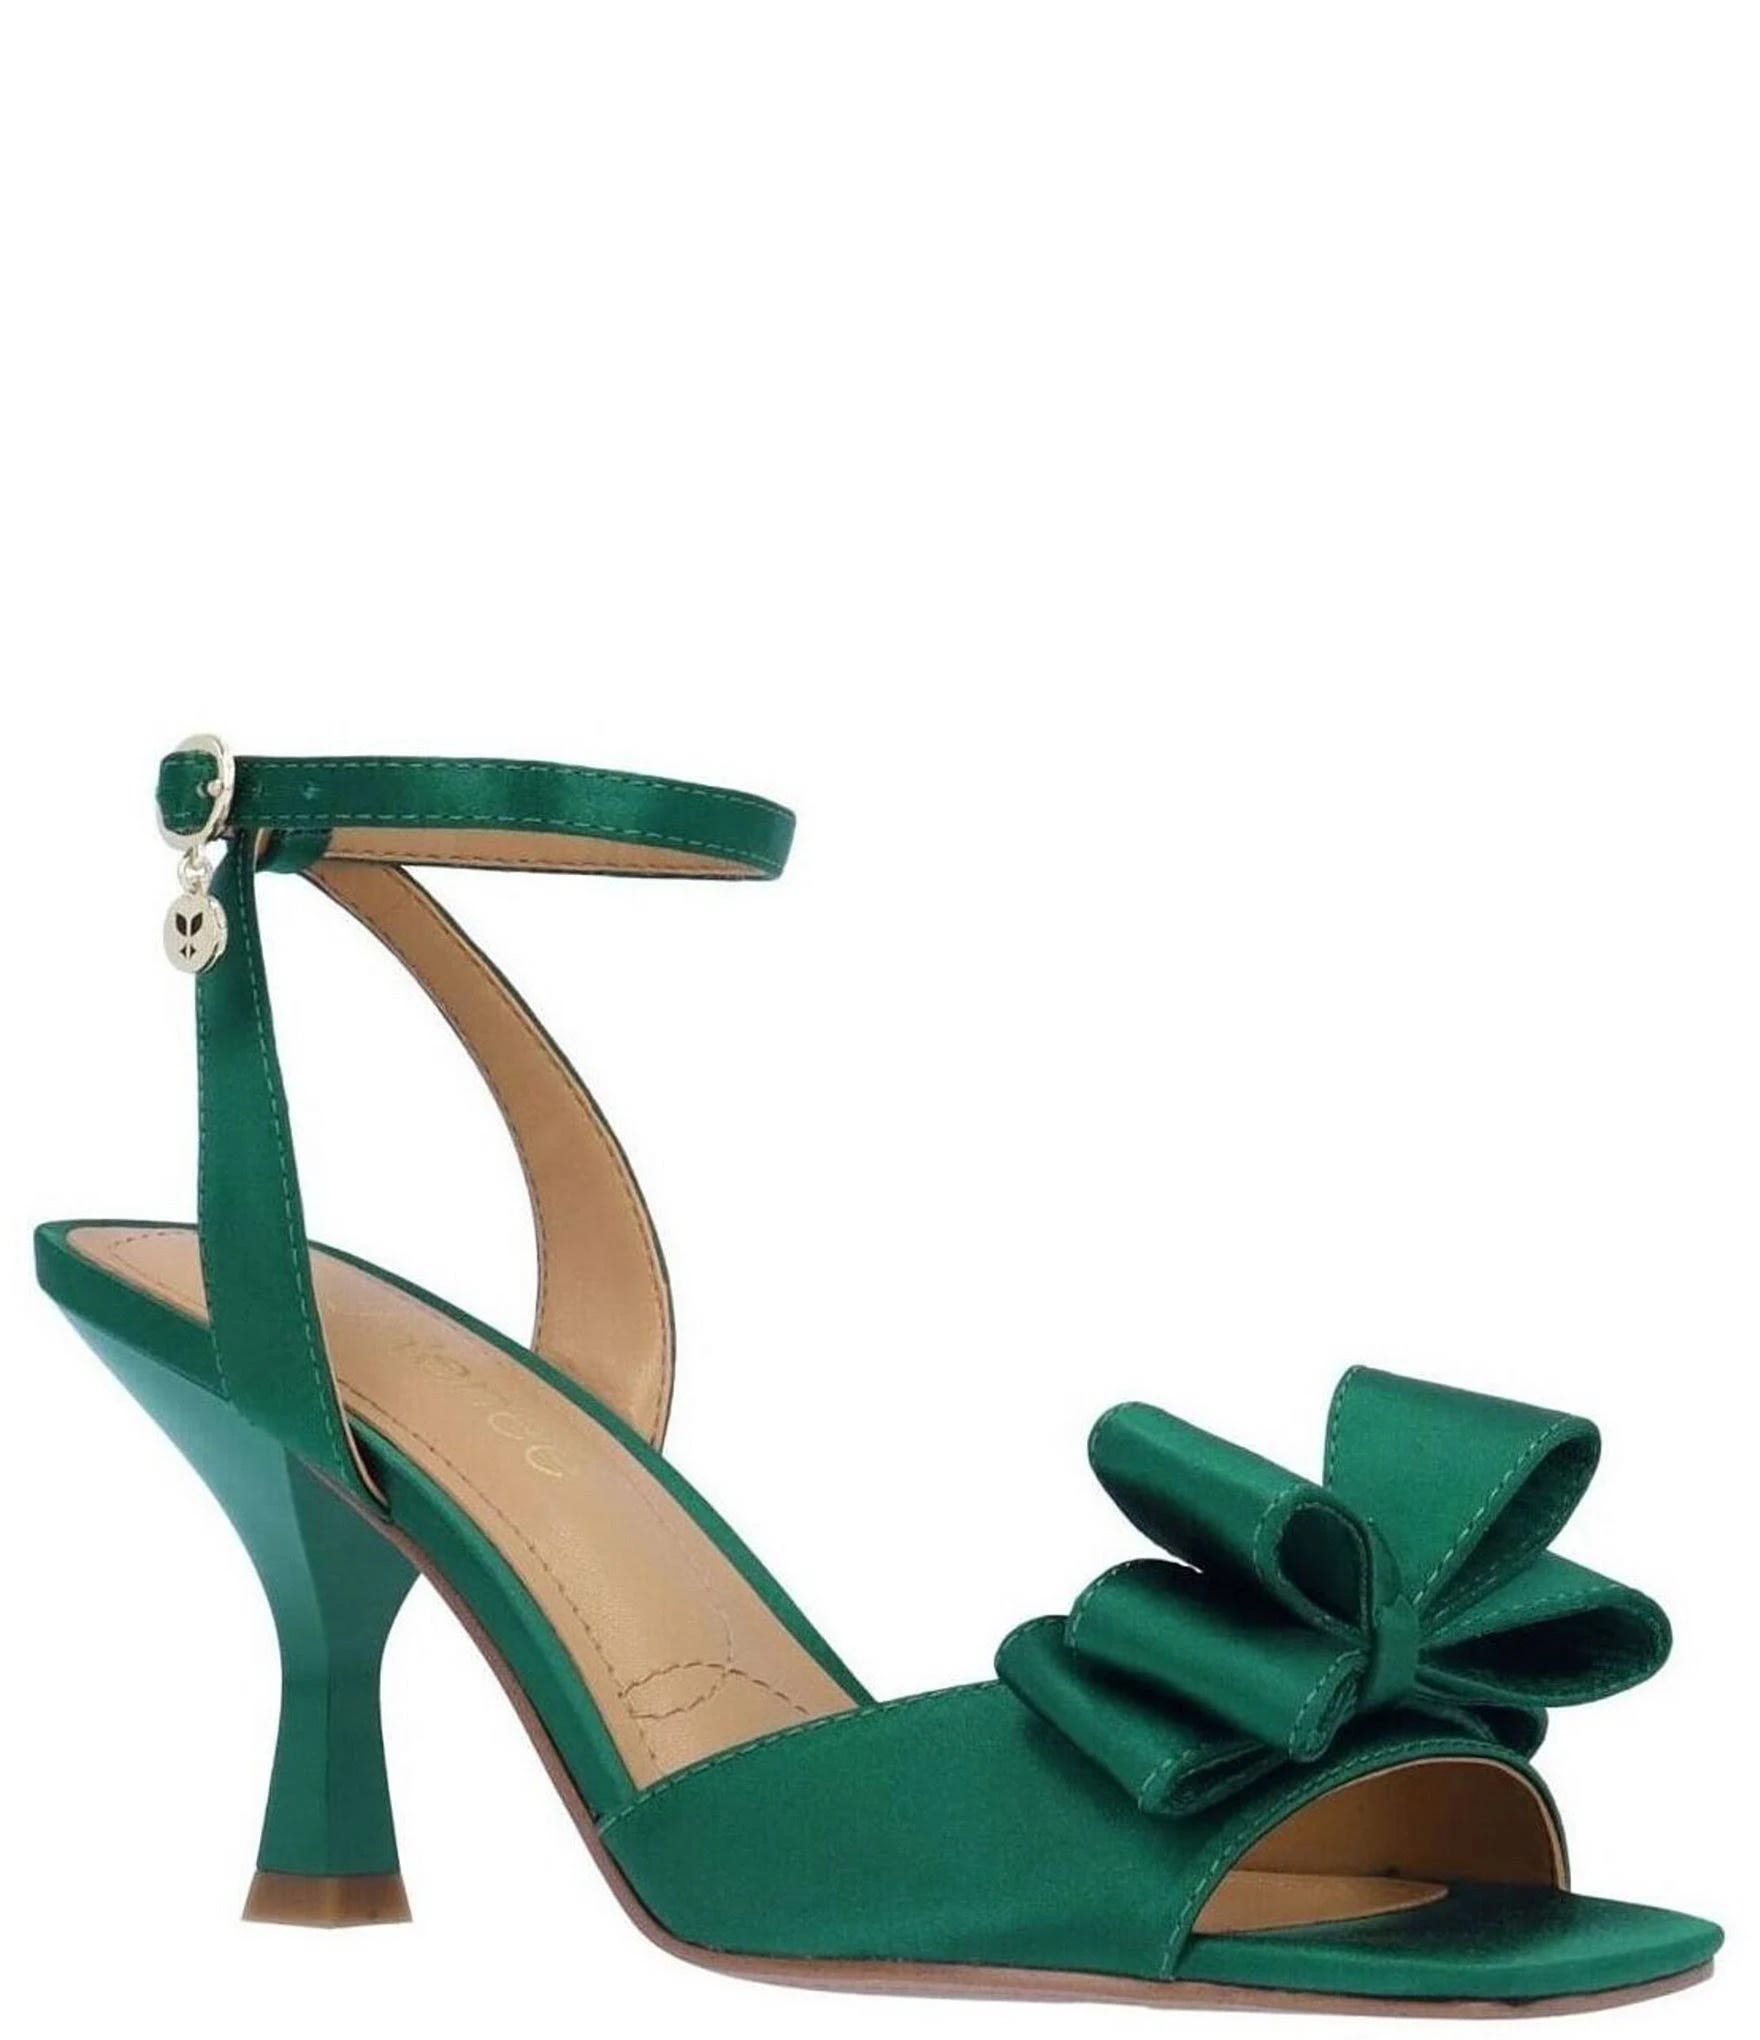 Emerald Green Satin Prom Shoes with Bow Detail by J. Renee | Image